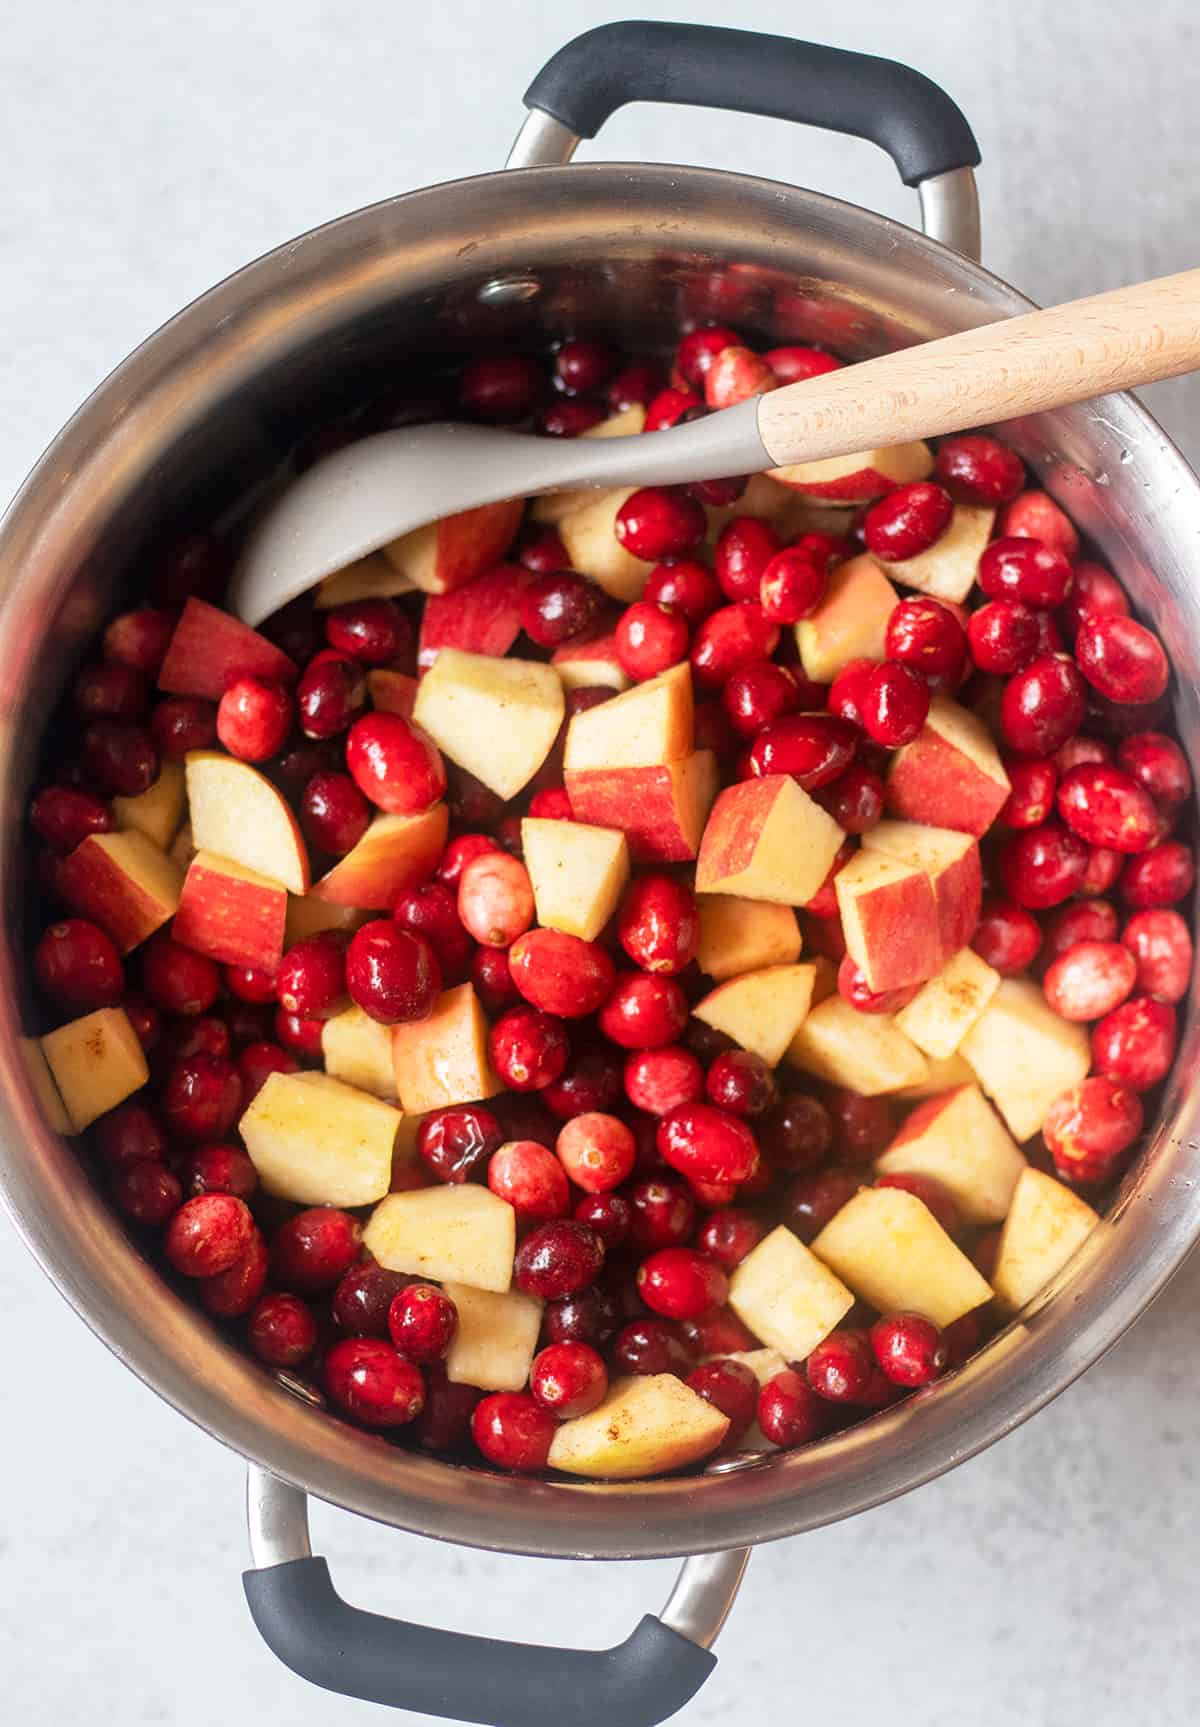 cranberries, and chopped apples in a large soup pot.